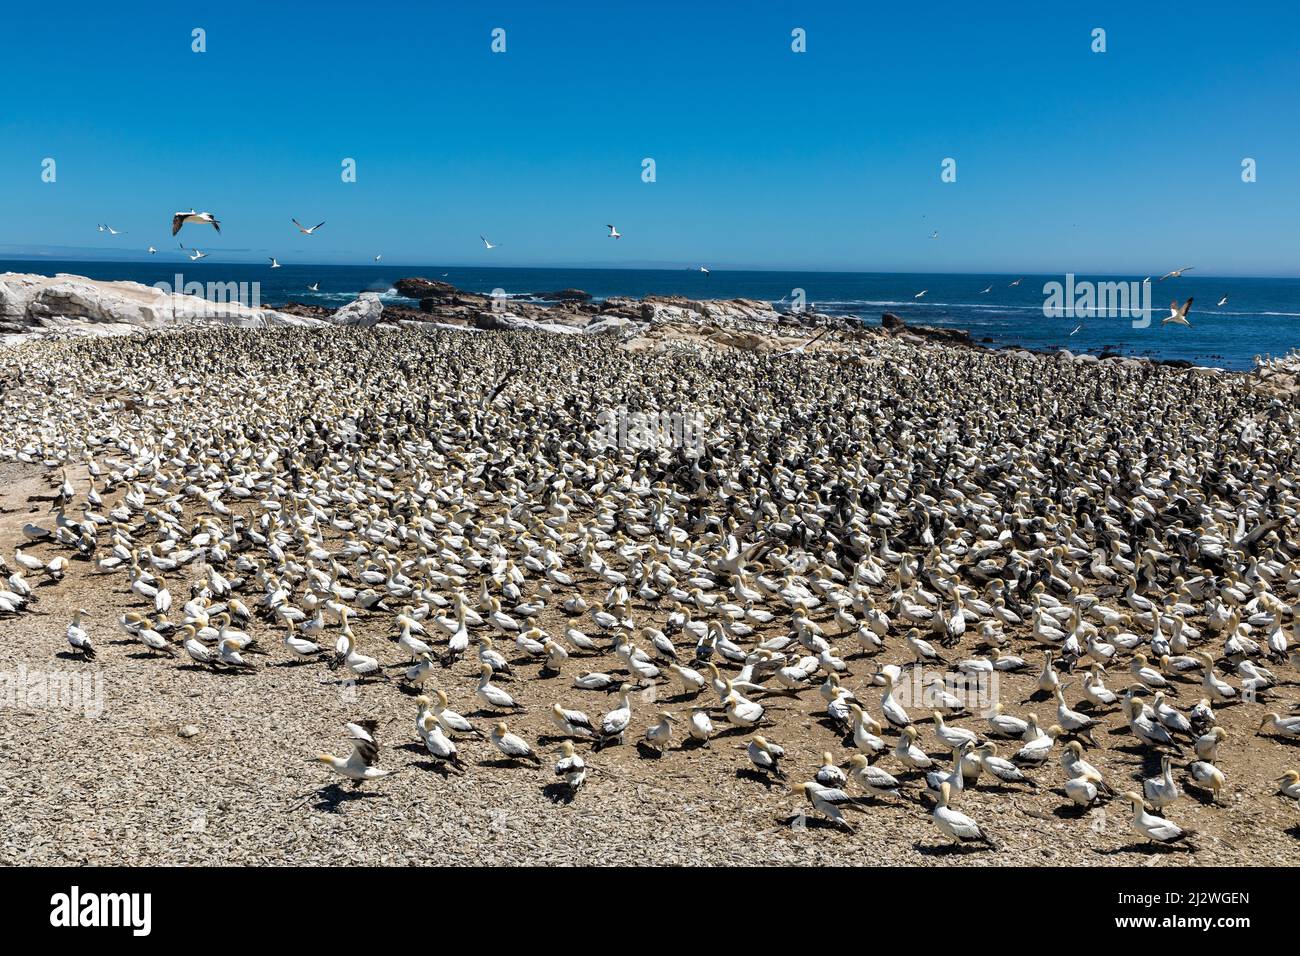 Large flock of Cape Gannet birds at their breeding colony at Bird Island, Lamberts Bay in the Western Cape province of South Africa, Stock Photo